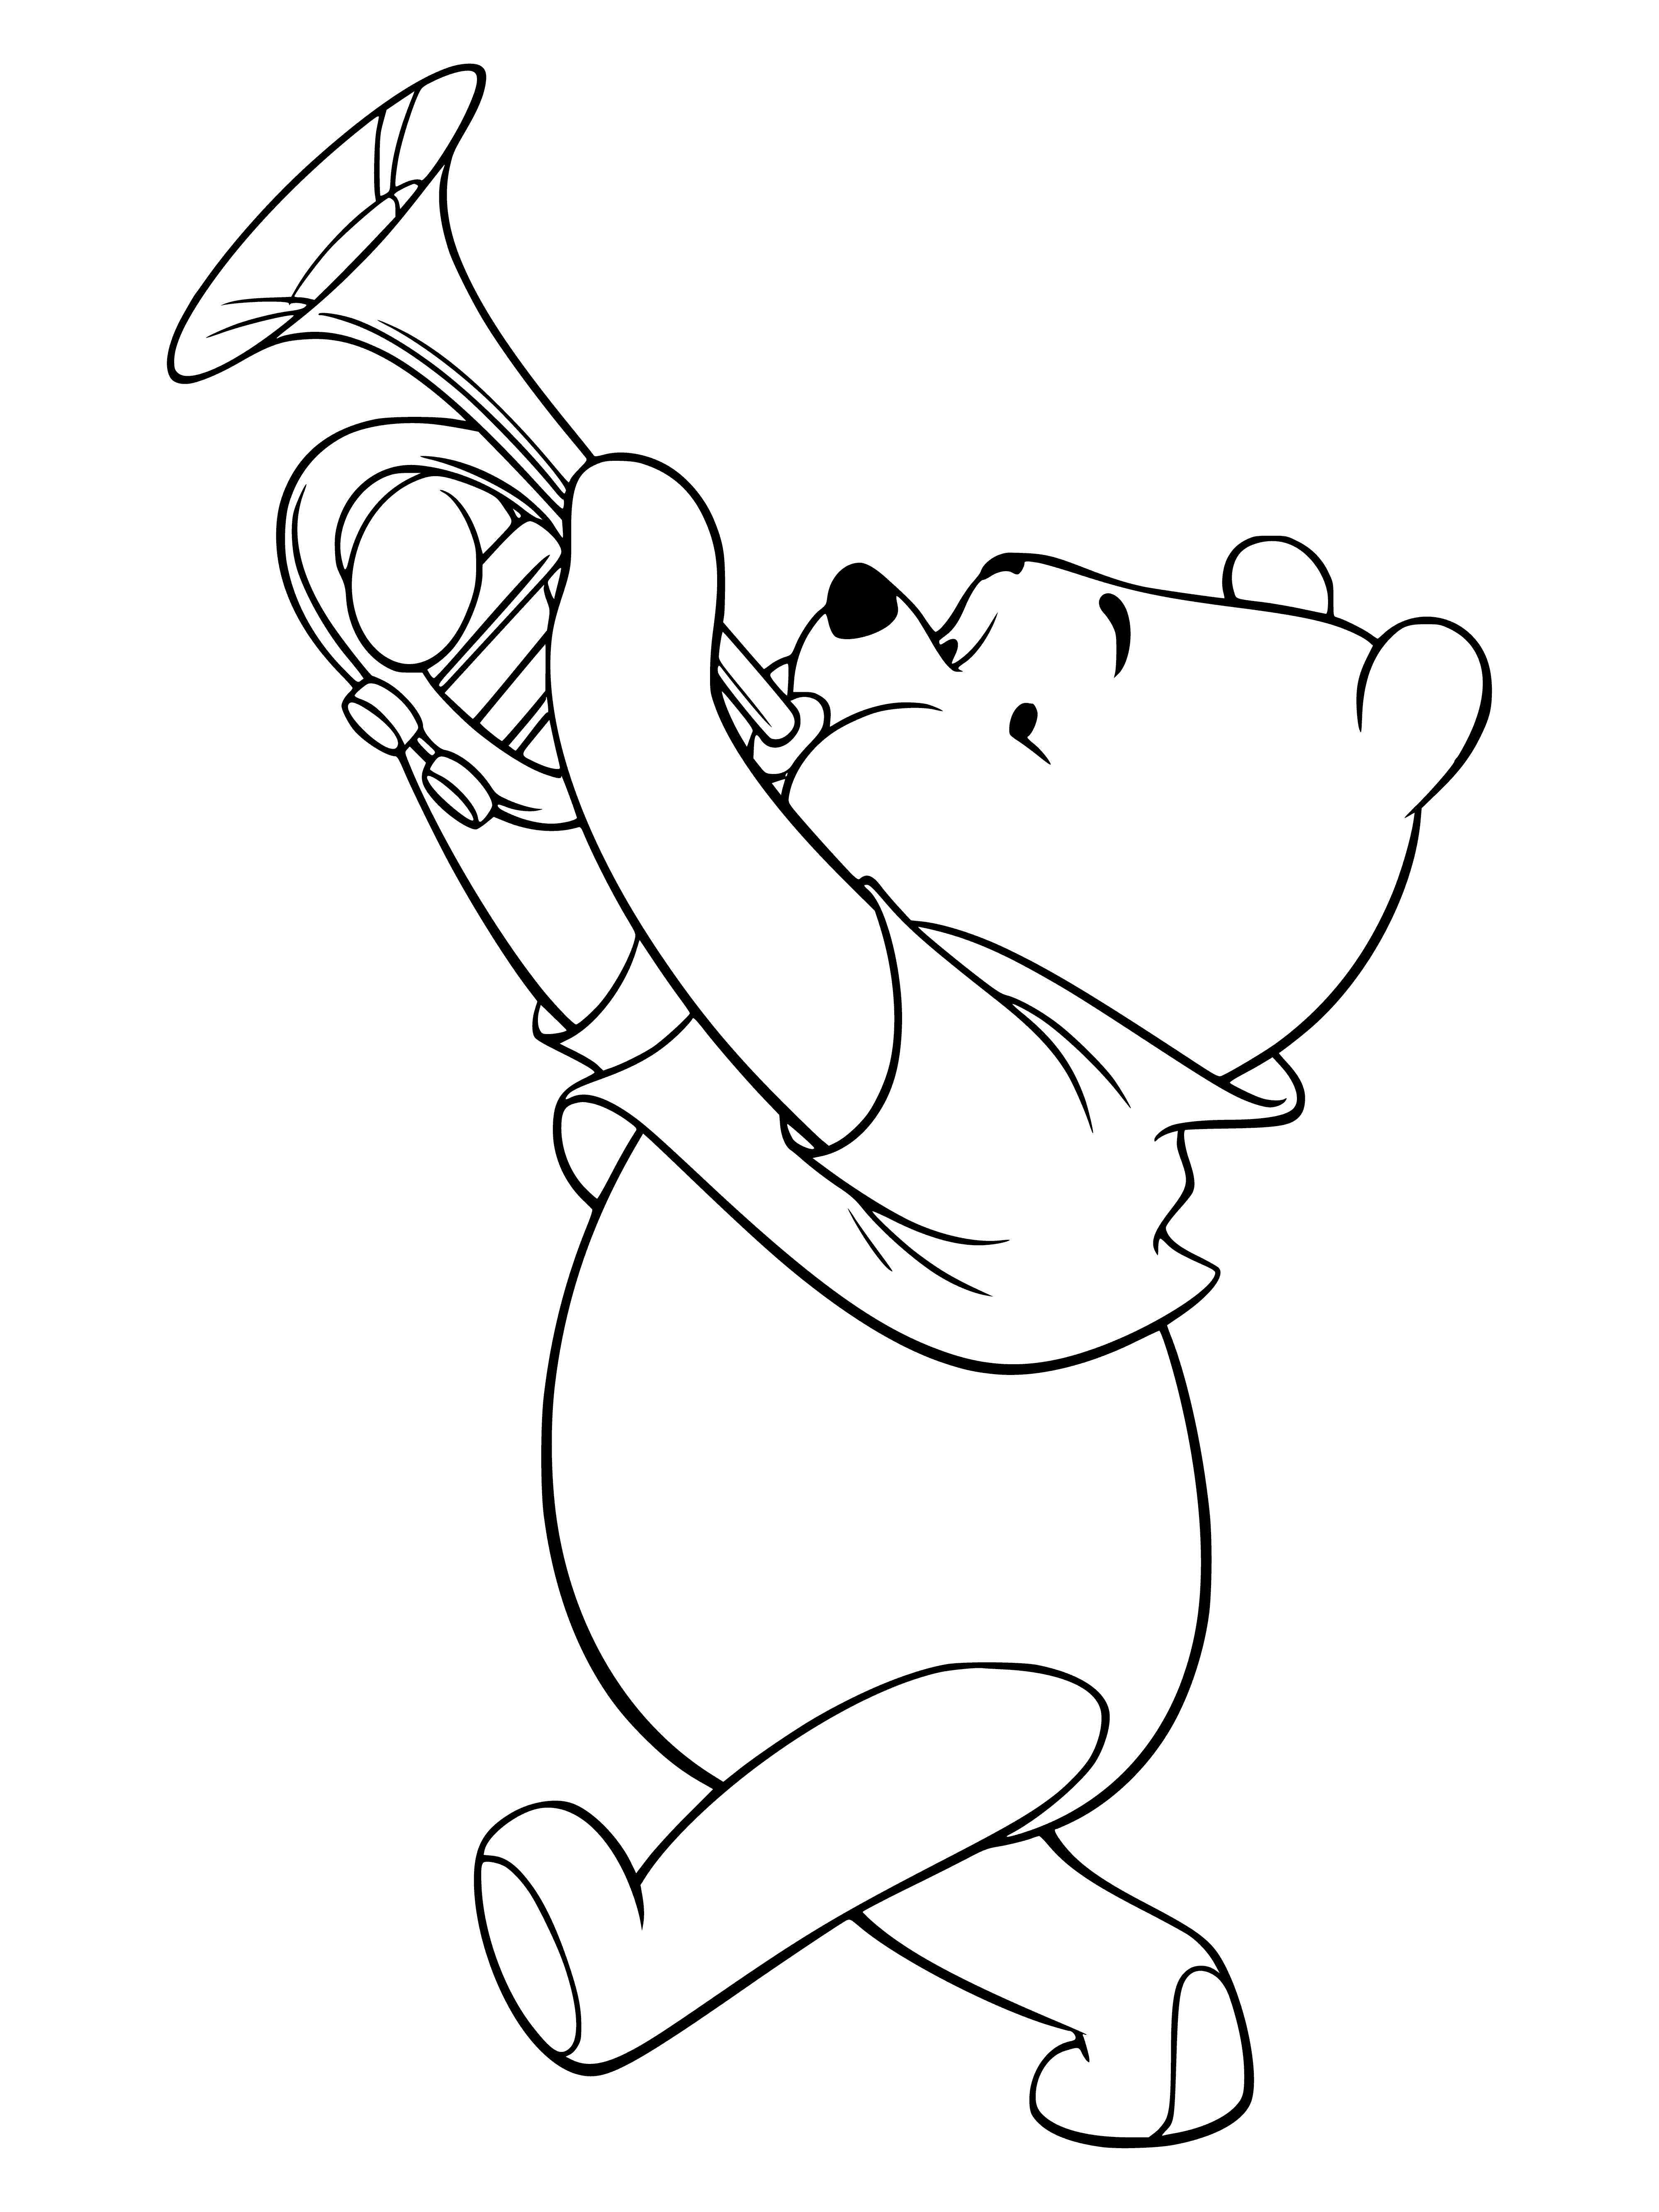 coloring page: Winnie the Pooh plays the trumpet surrounded by bees. #pooh